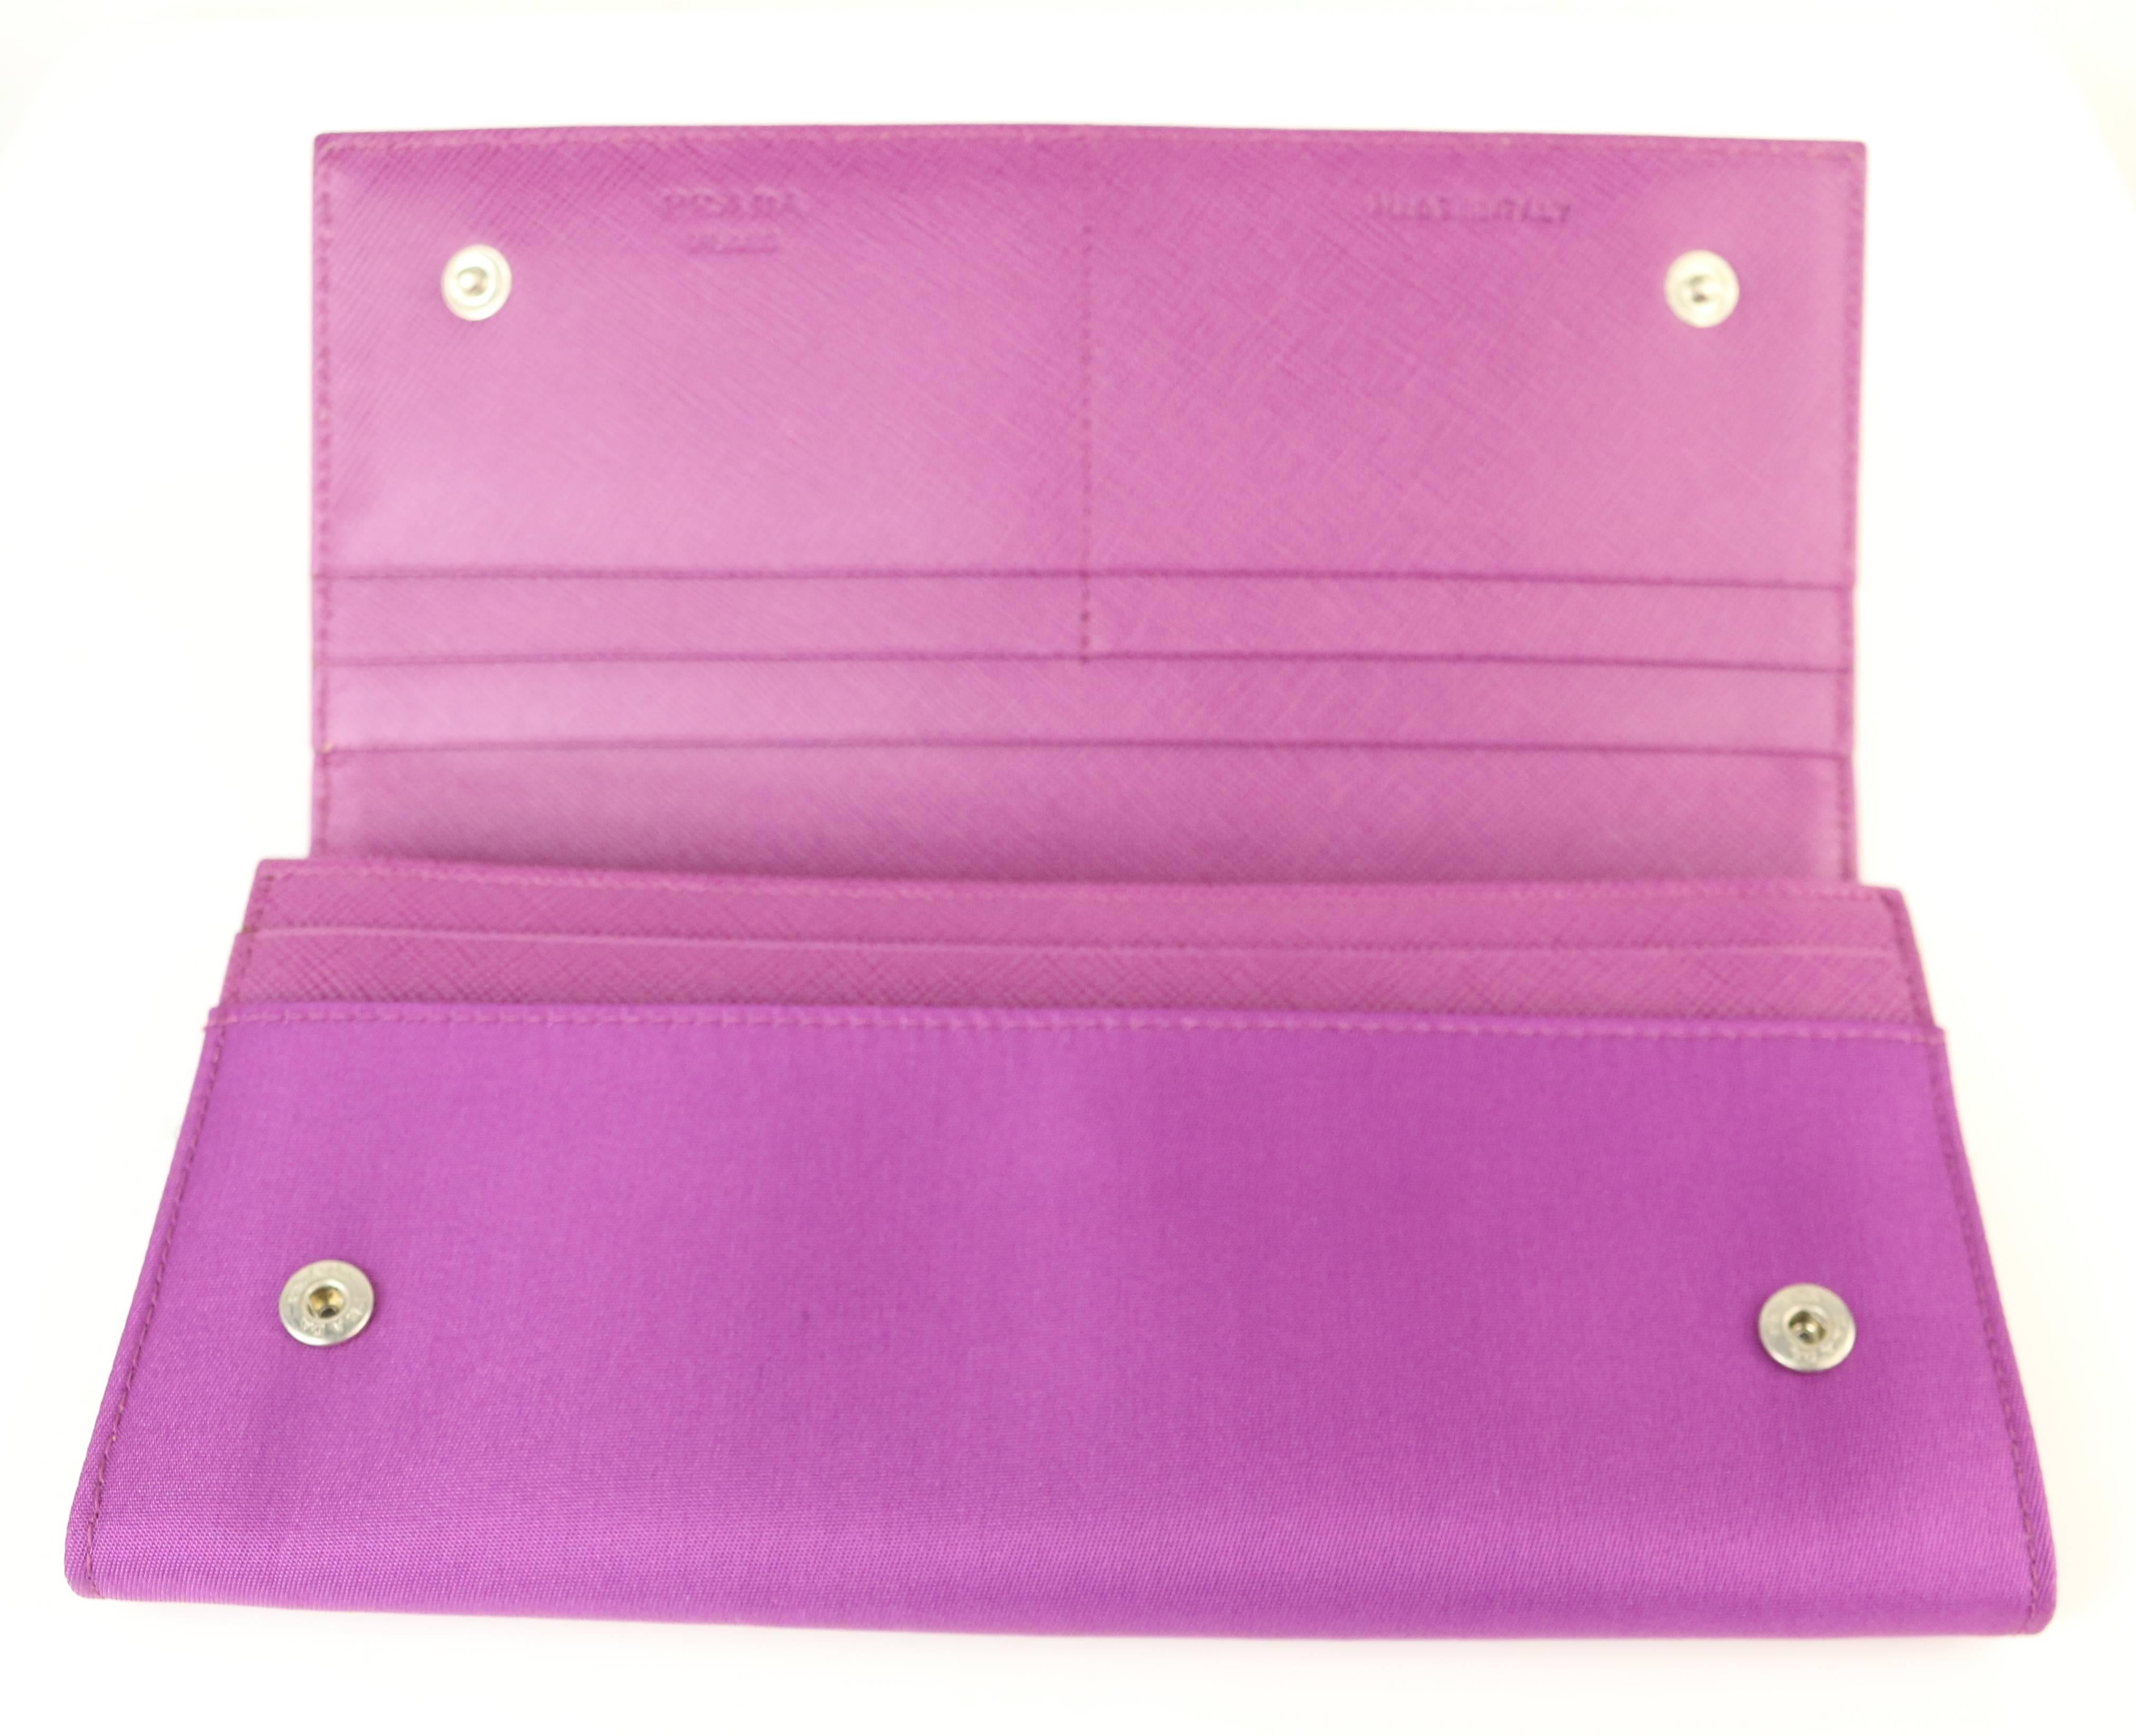 - Prada purple polyester wallet. 

- Compartments for containing cards, money, and coins etc... 

- Snap buttons closure. 

- Length: 7.5 inches. Height: 3.5 inches. Widht: 0.75 inches. 

